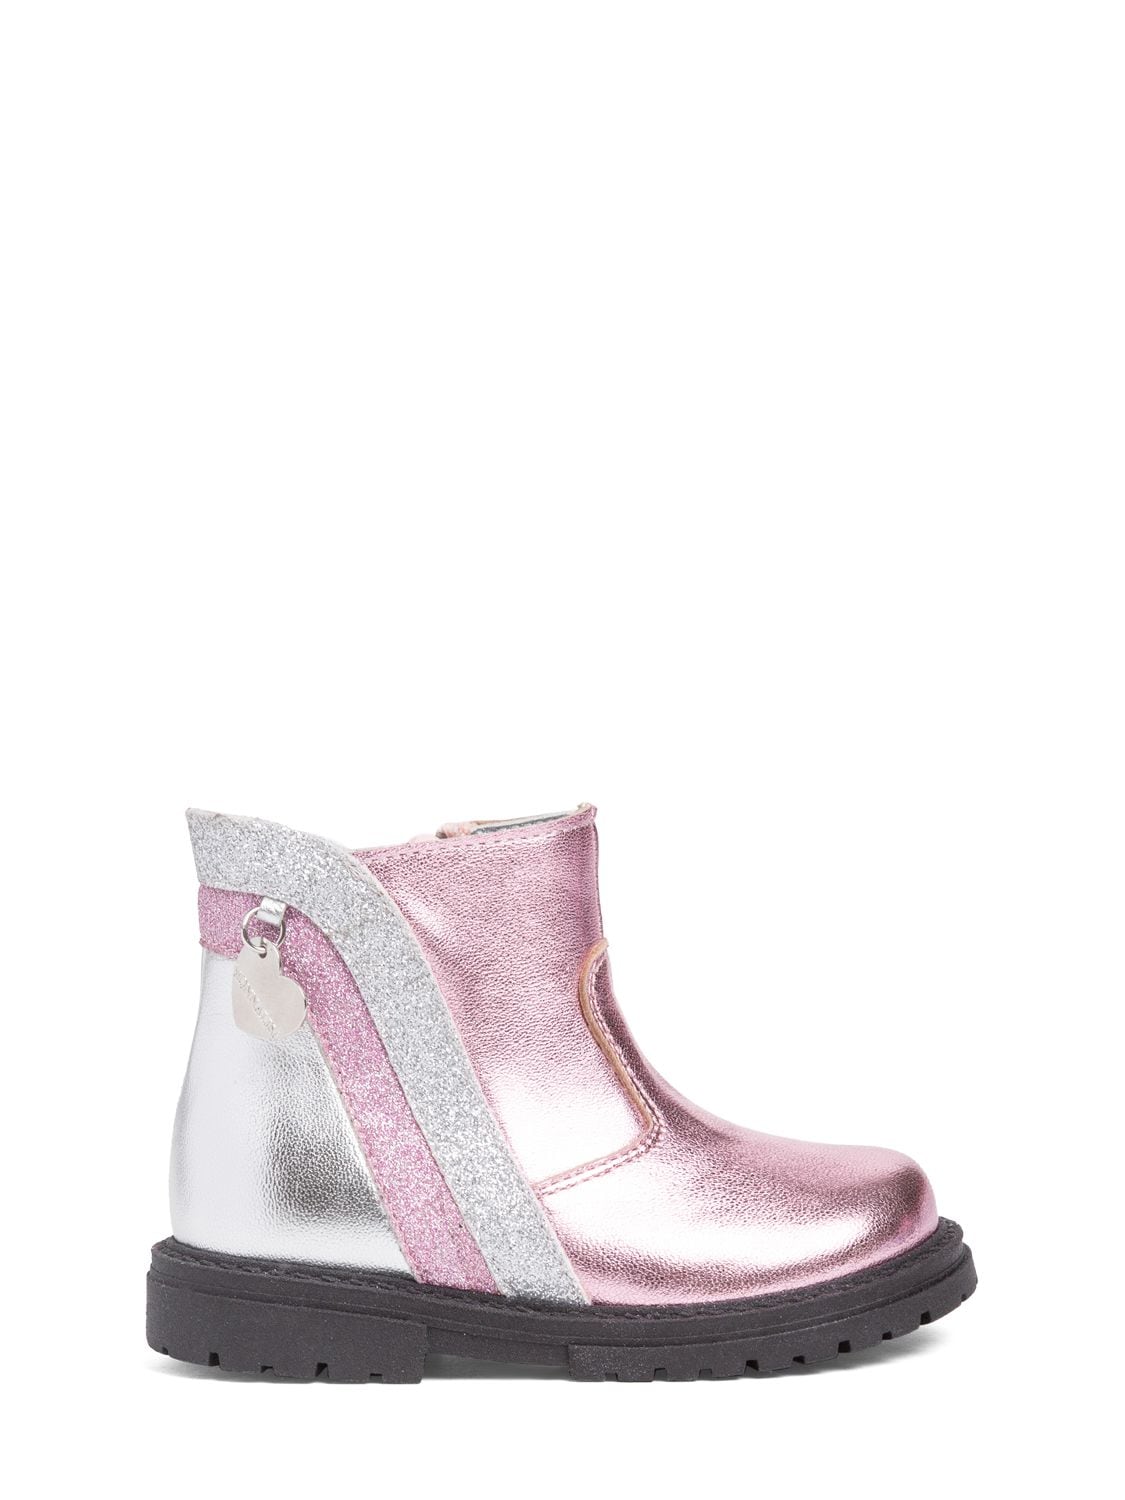 Monnalisa Kids' Laminated Leather Boots In Pink